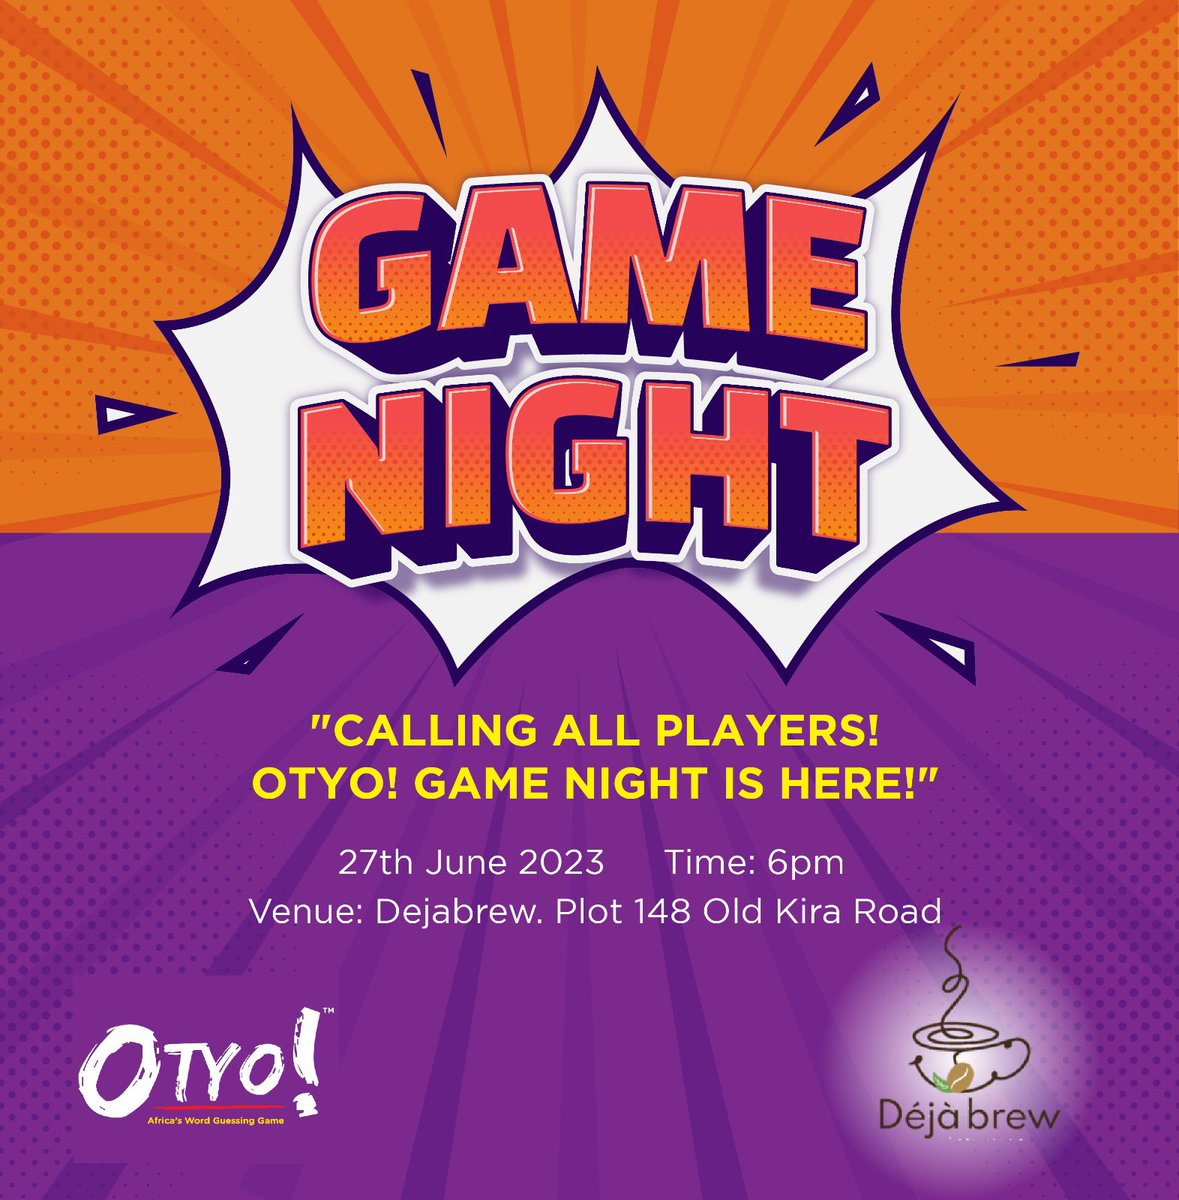 Eid Al Adha has been confirmed for 28th June 2023!

Gear up for an epic game night before the long-awaited public holiday. 

Let the fun and friendly competition begin!

#theotyogame #gamenight #letsplay #Africangame #wordgame #publicholiday #tribes